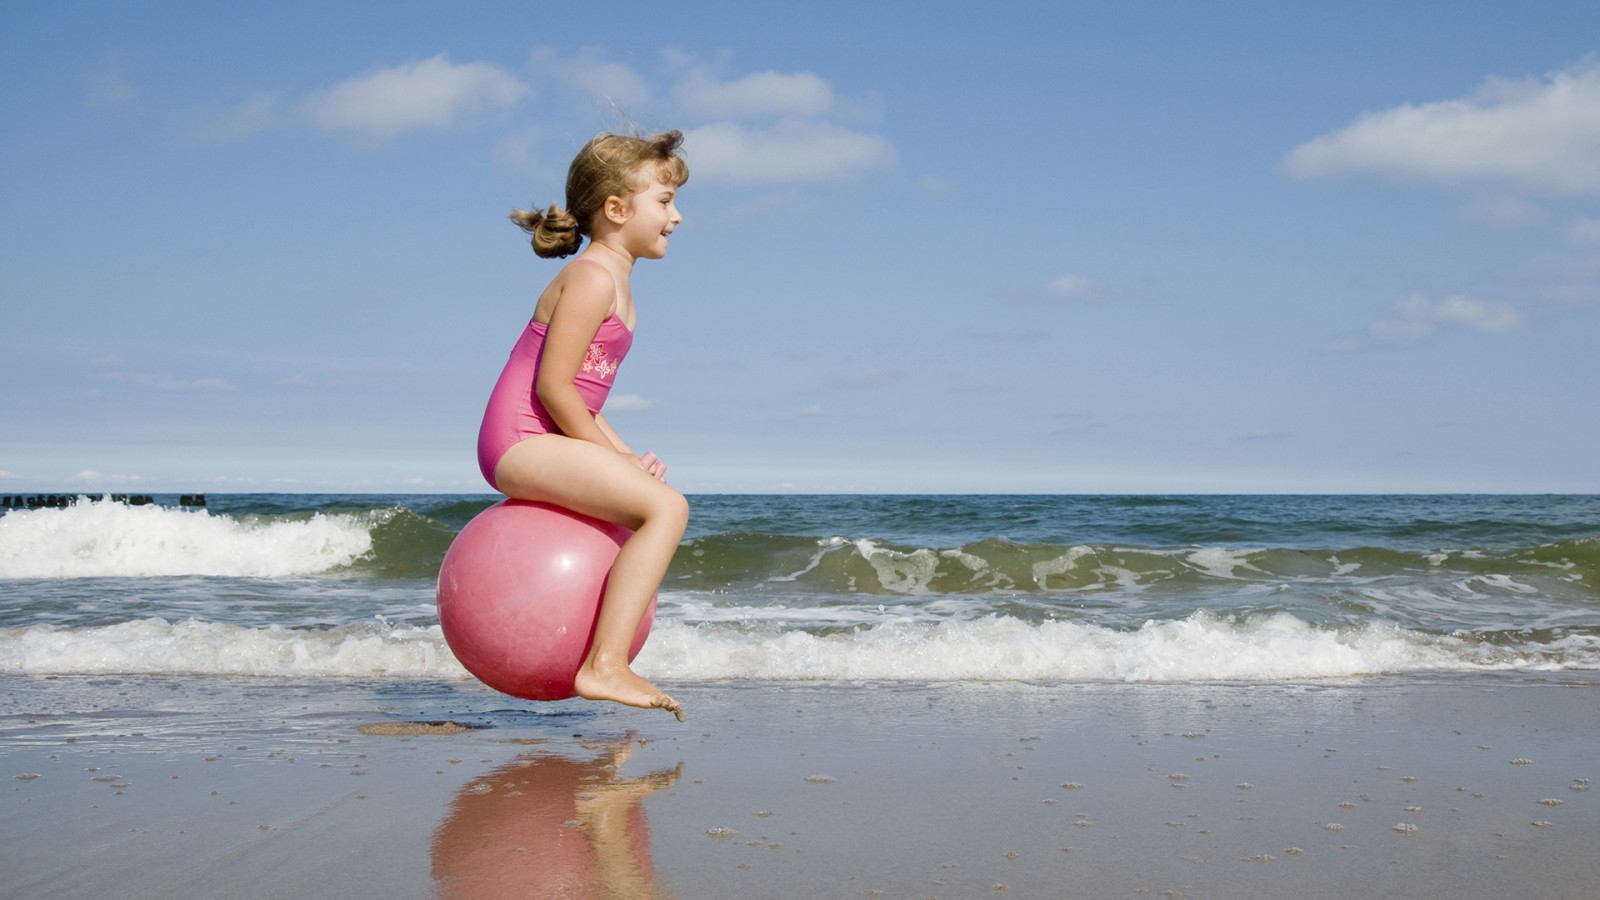 Child bouncing on a beach